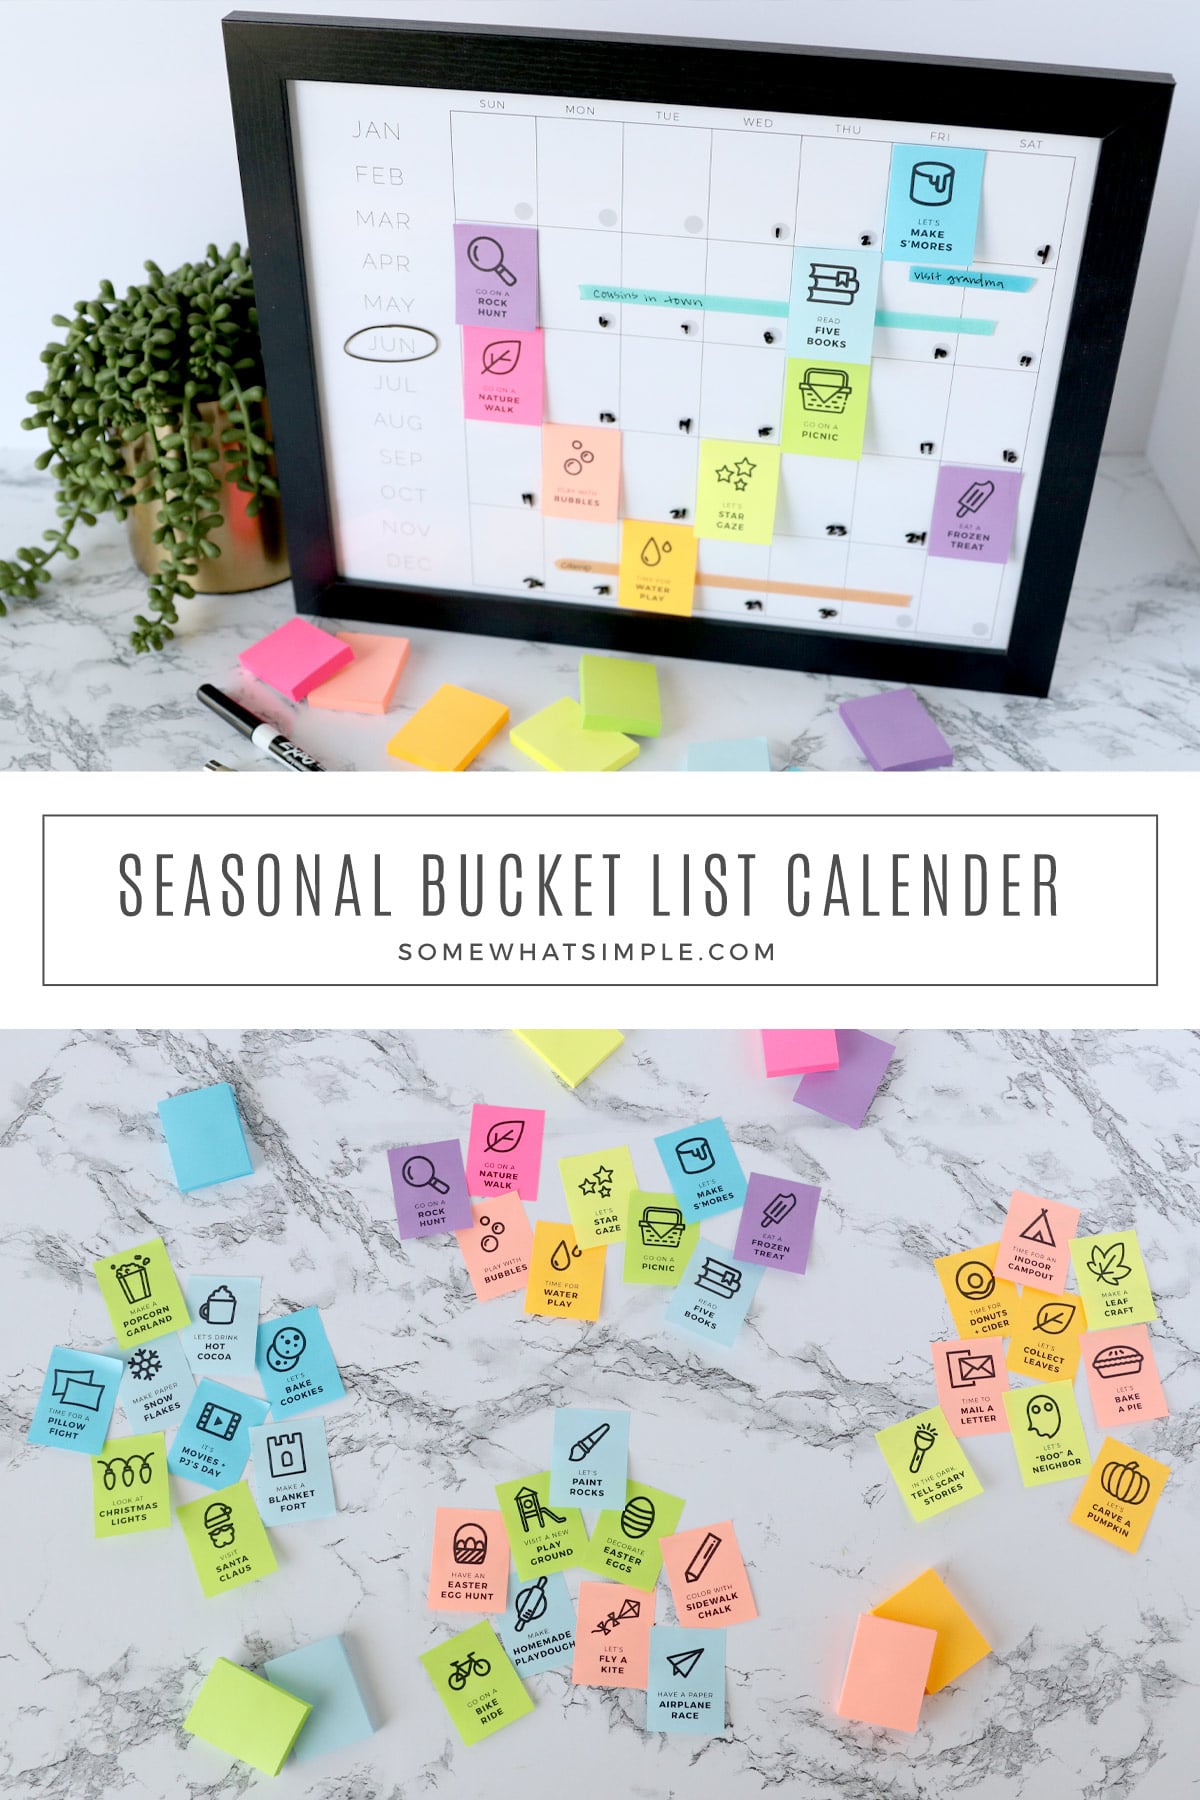 Things to do and things to see for every season of the year! This seasonal bucket list is a fun way to make memories all year long! via @somewhatsimple